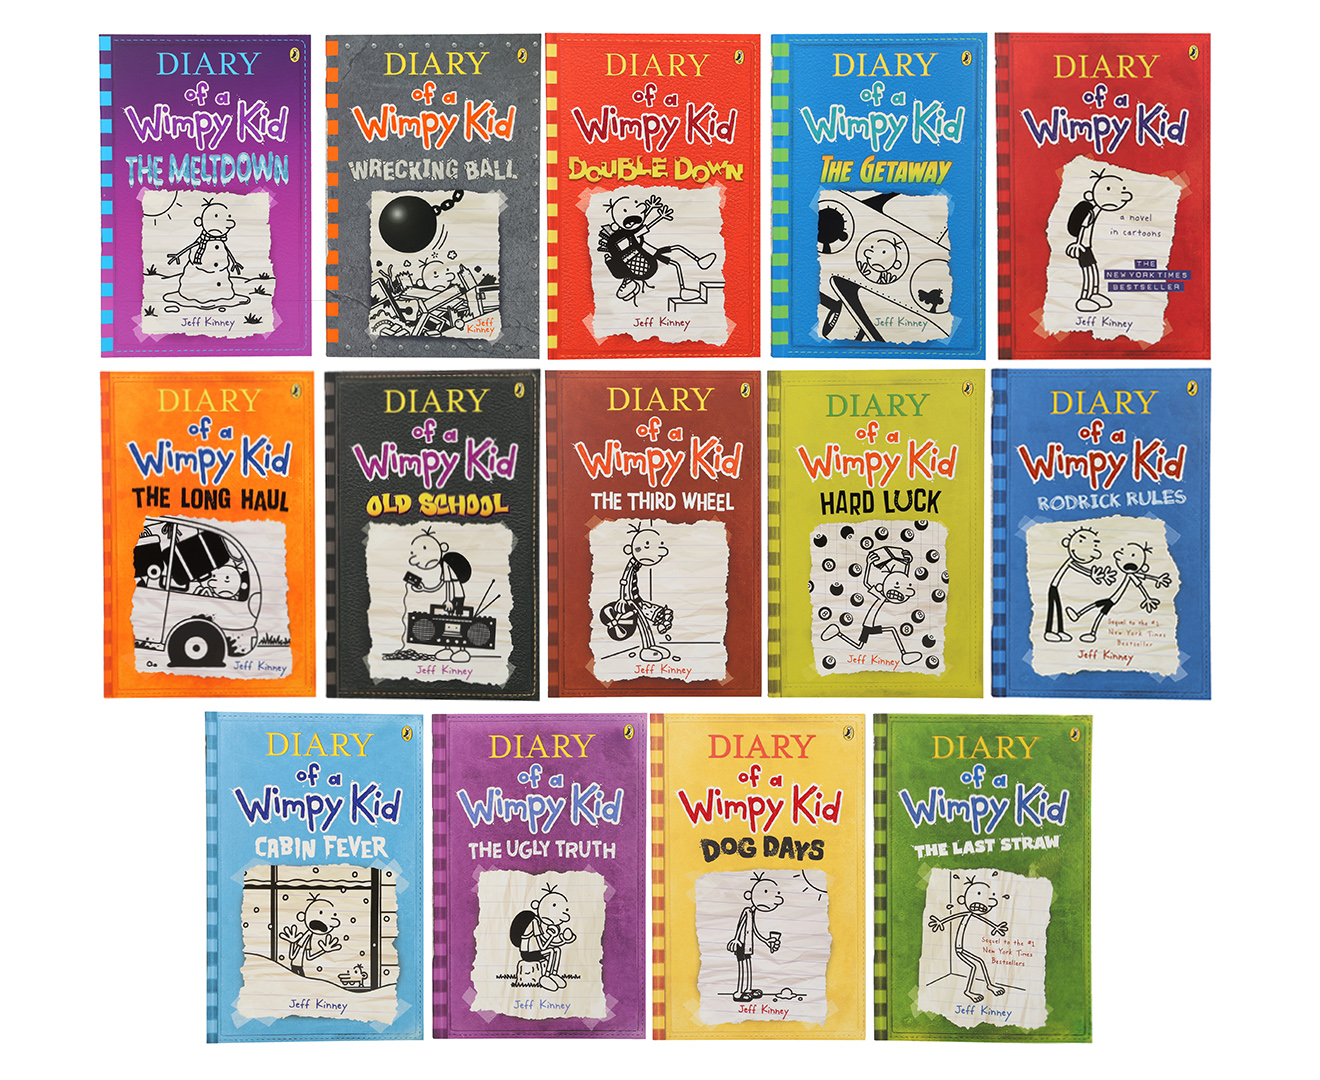 Diary of a Wimpy Kid 14Book Collection by Jeff Kinney